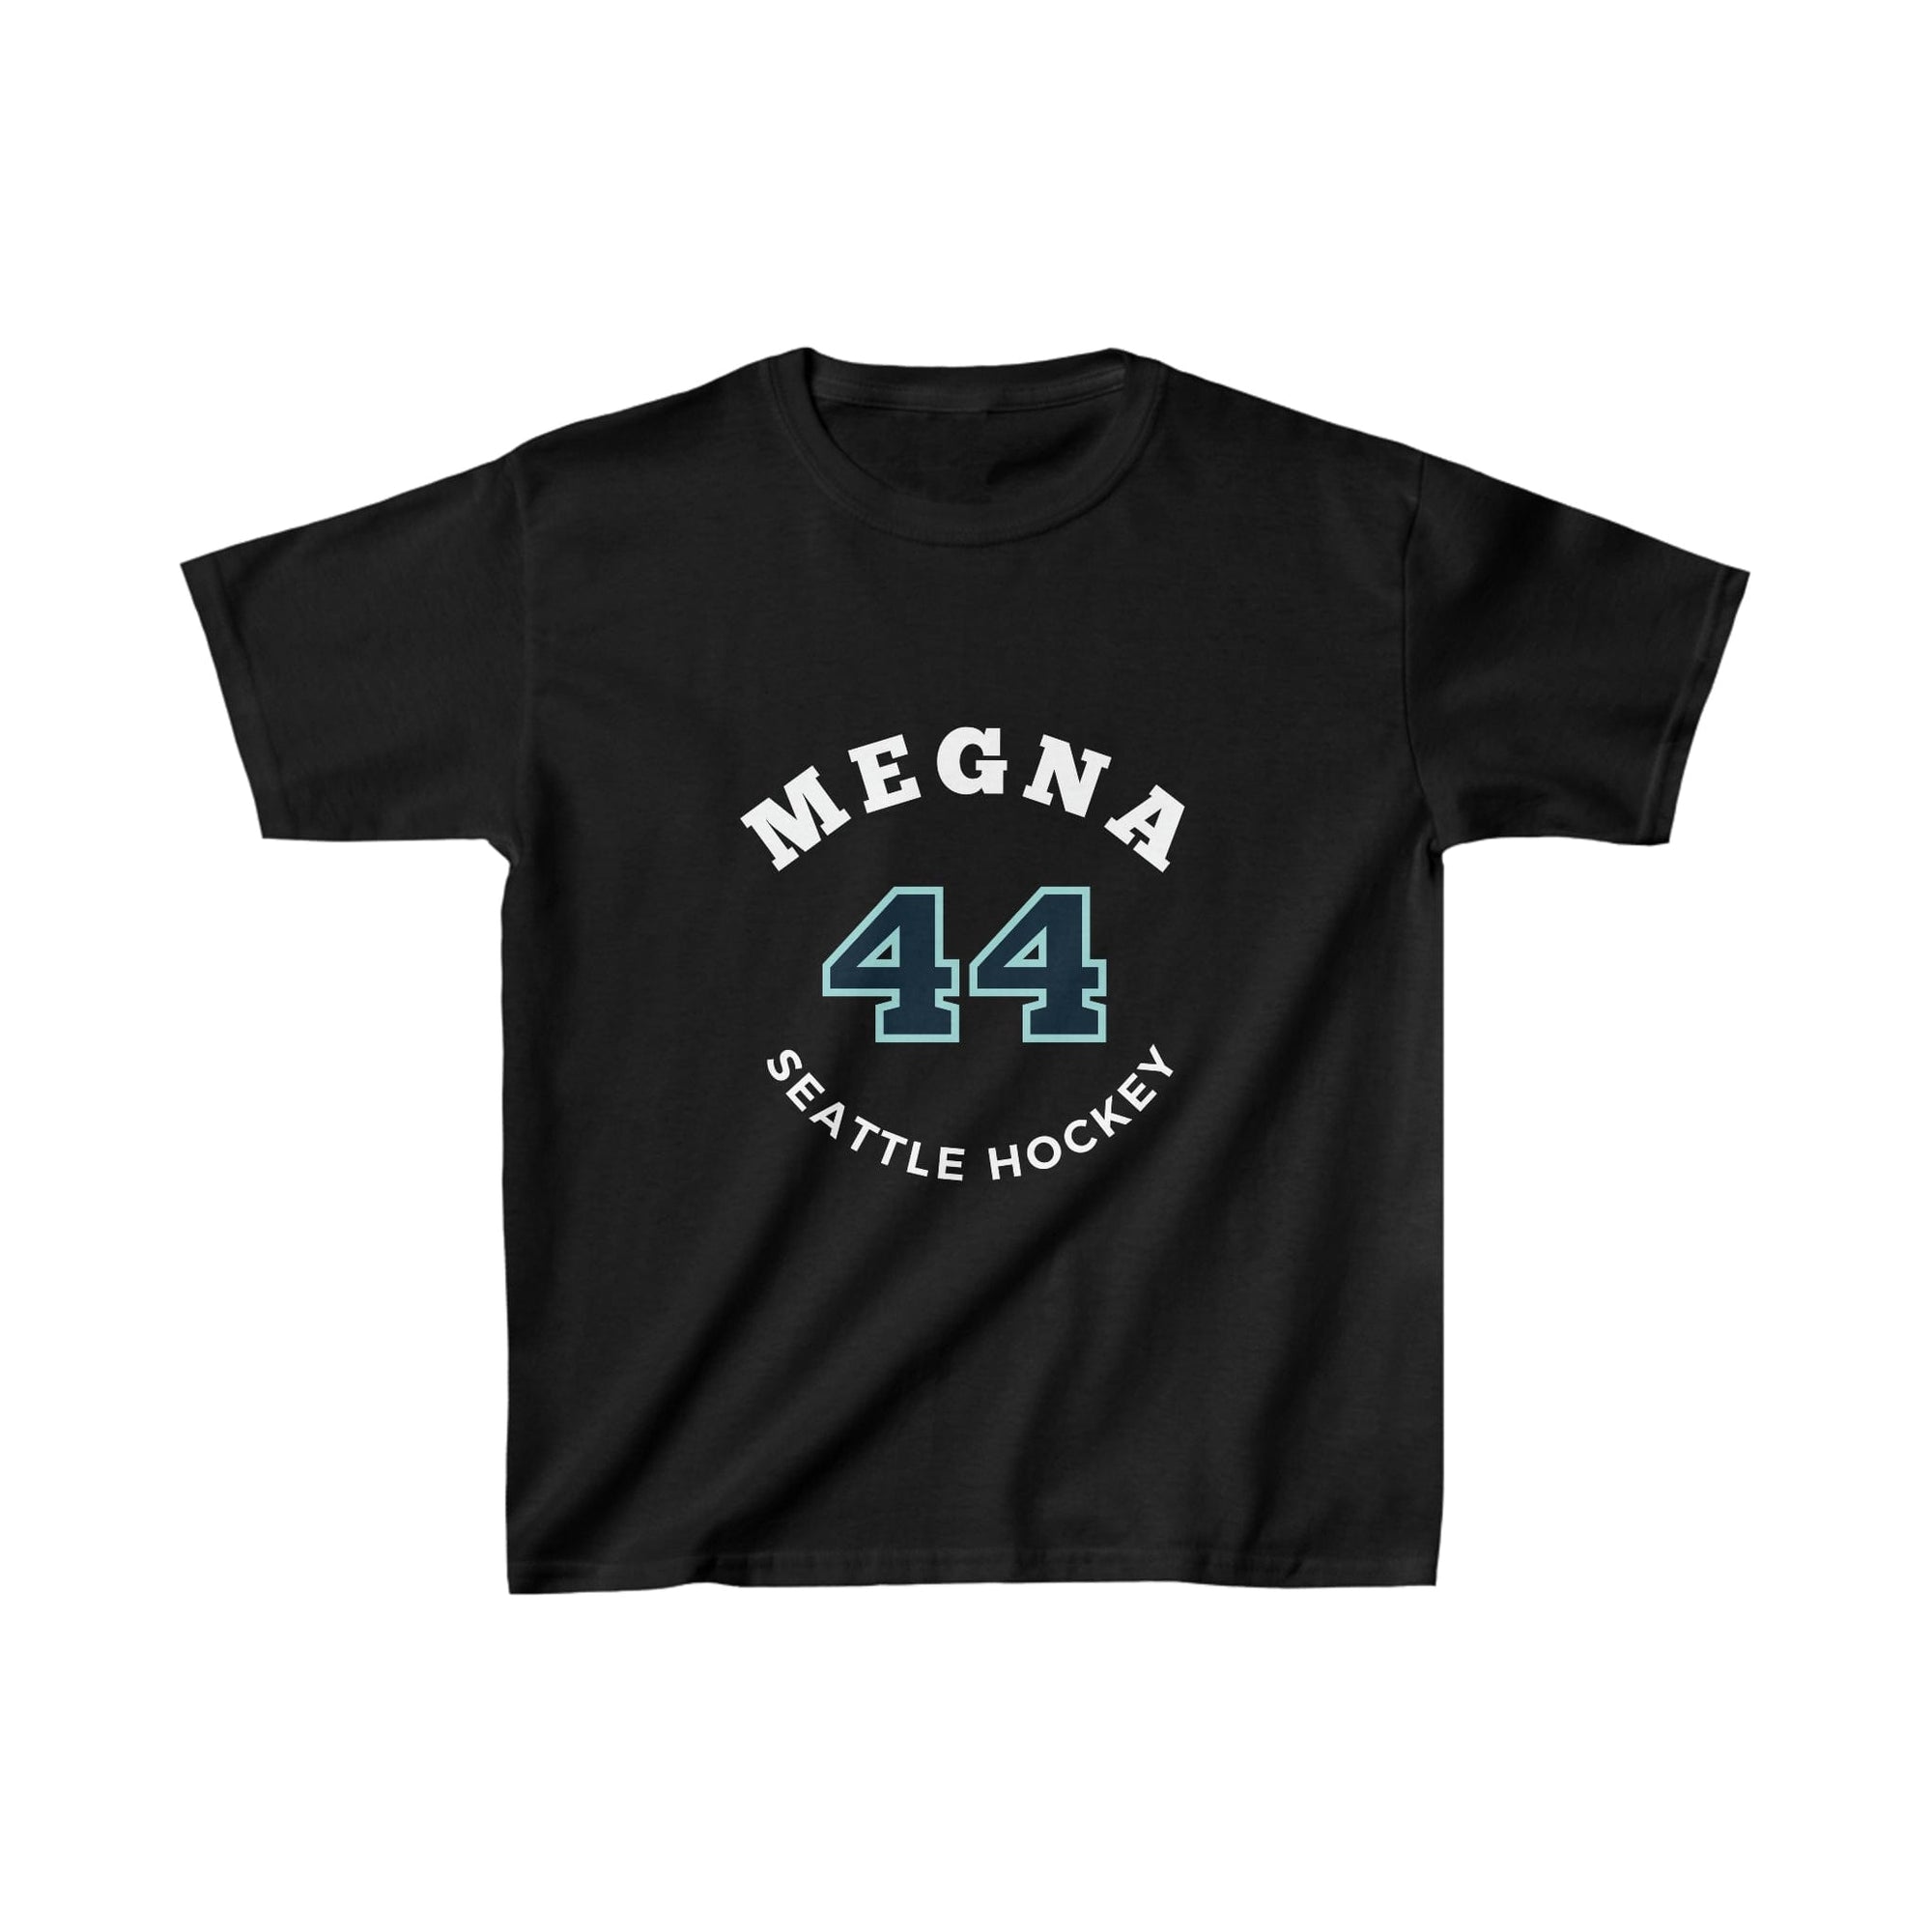 Kids clothes Megna 44 Seattle Hockey Number Arch Design Kids Tee